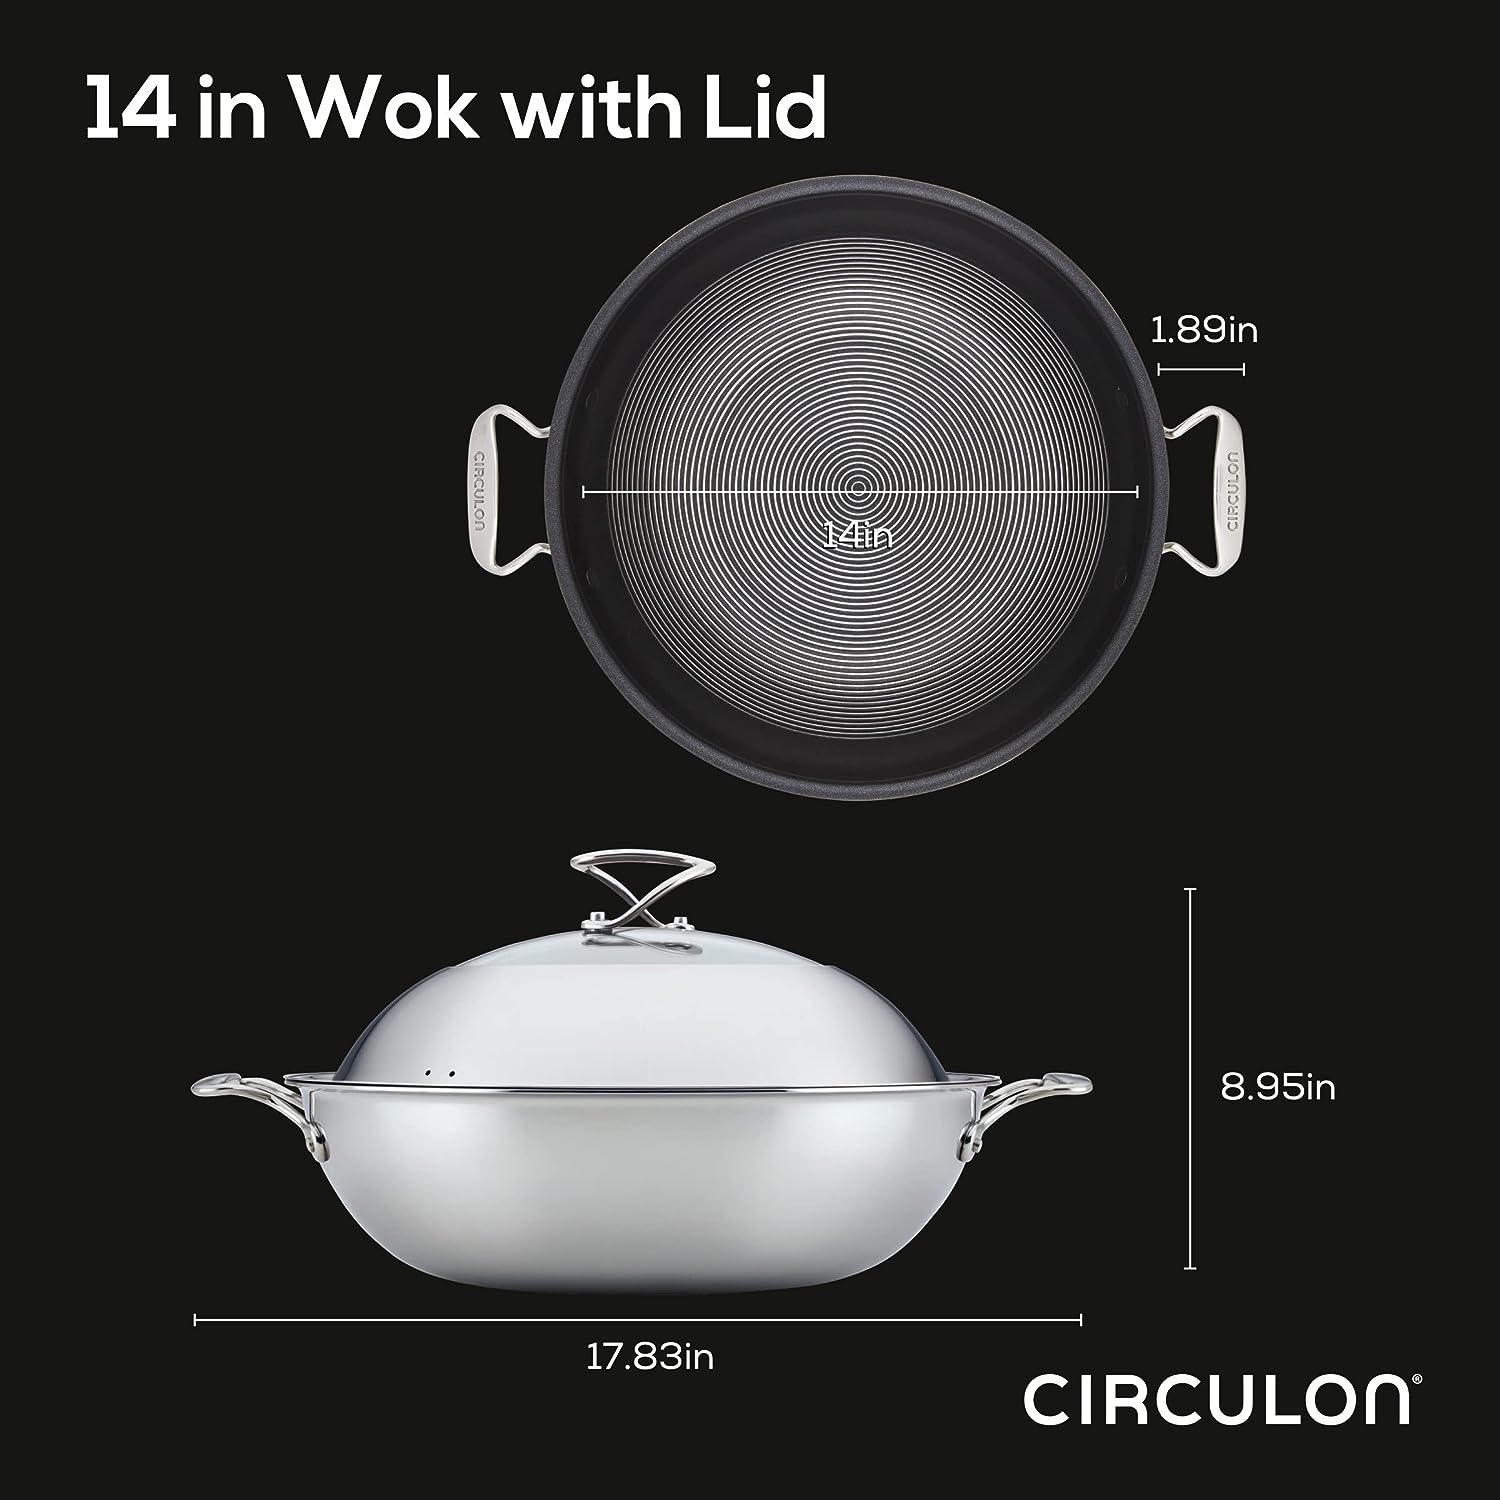 https://bigbigmart.com/wp-content/uploads/2023/09/Circulon-Clad-Stainless-Steel-Wok-Stir-Fry-with-Glass-Lid-and-Hybrid-SteelShield-and-Nonstick-Technology-14-Inch-Silver1.jpg